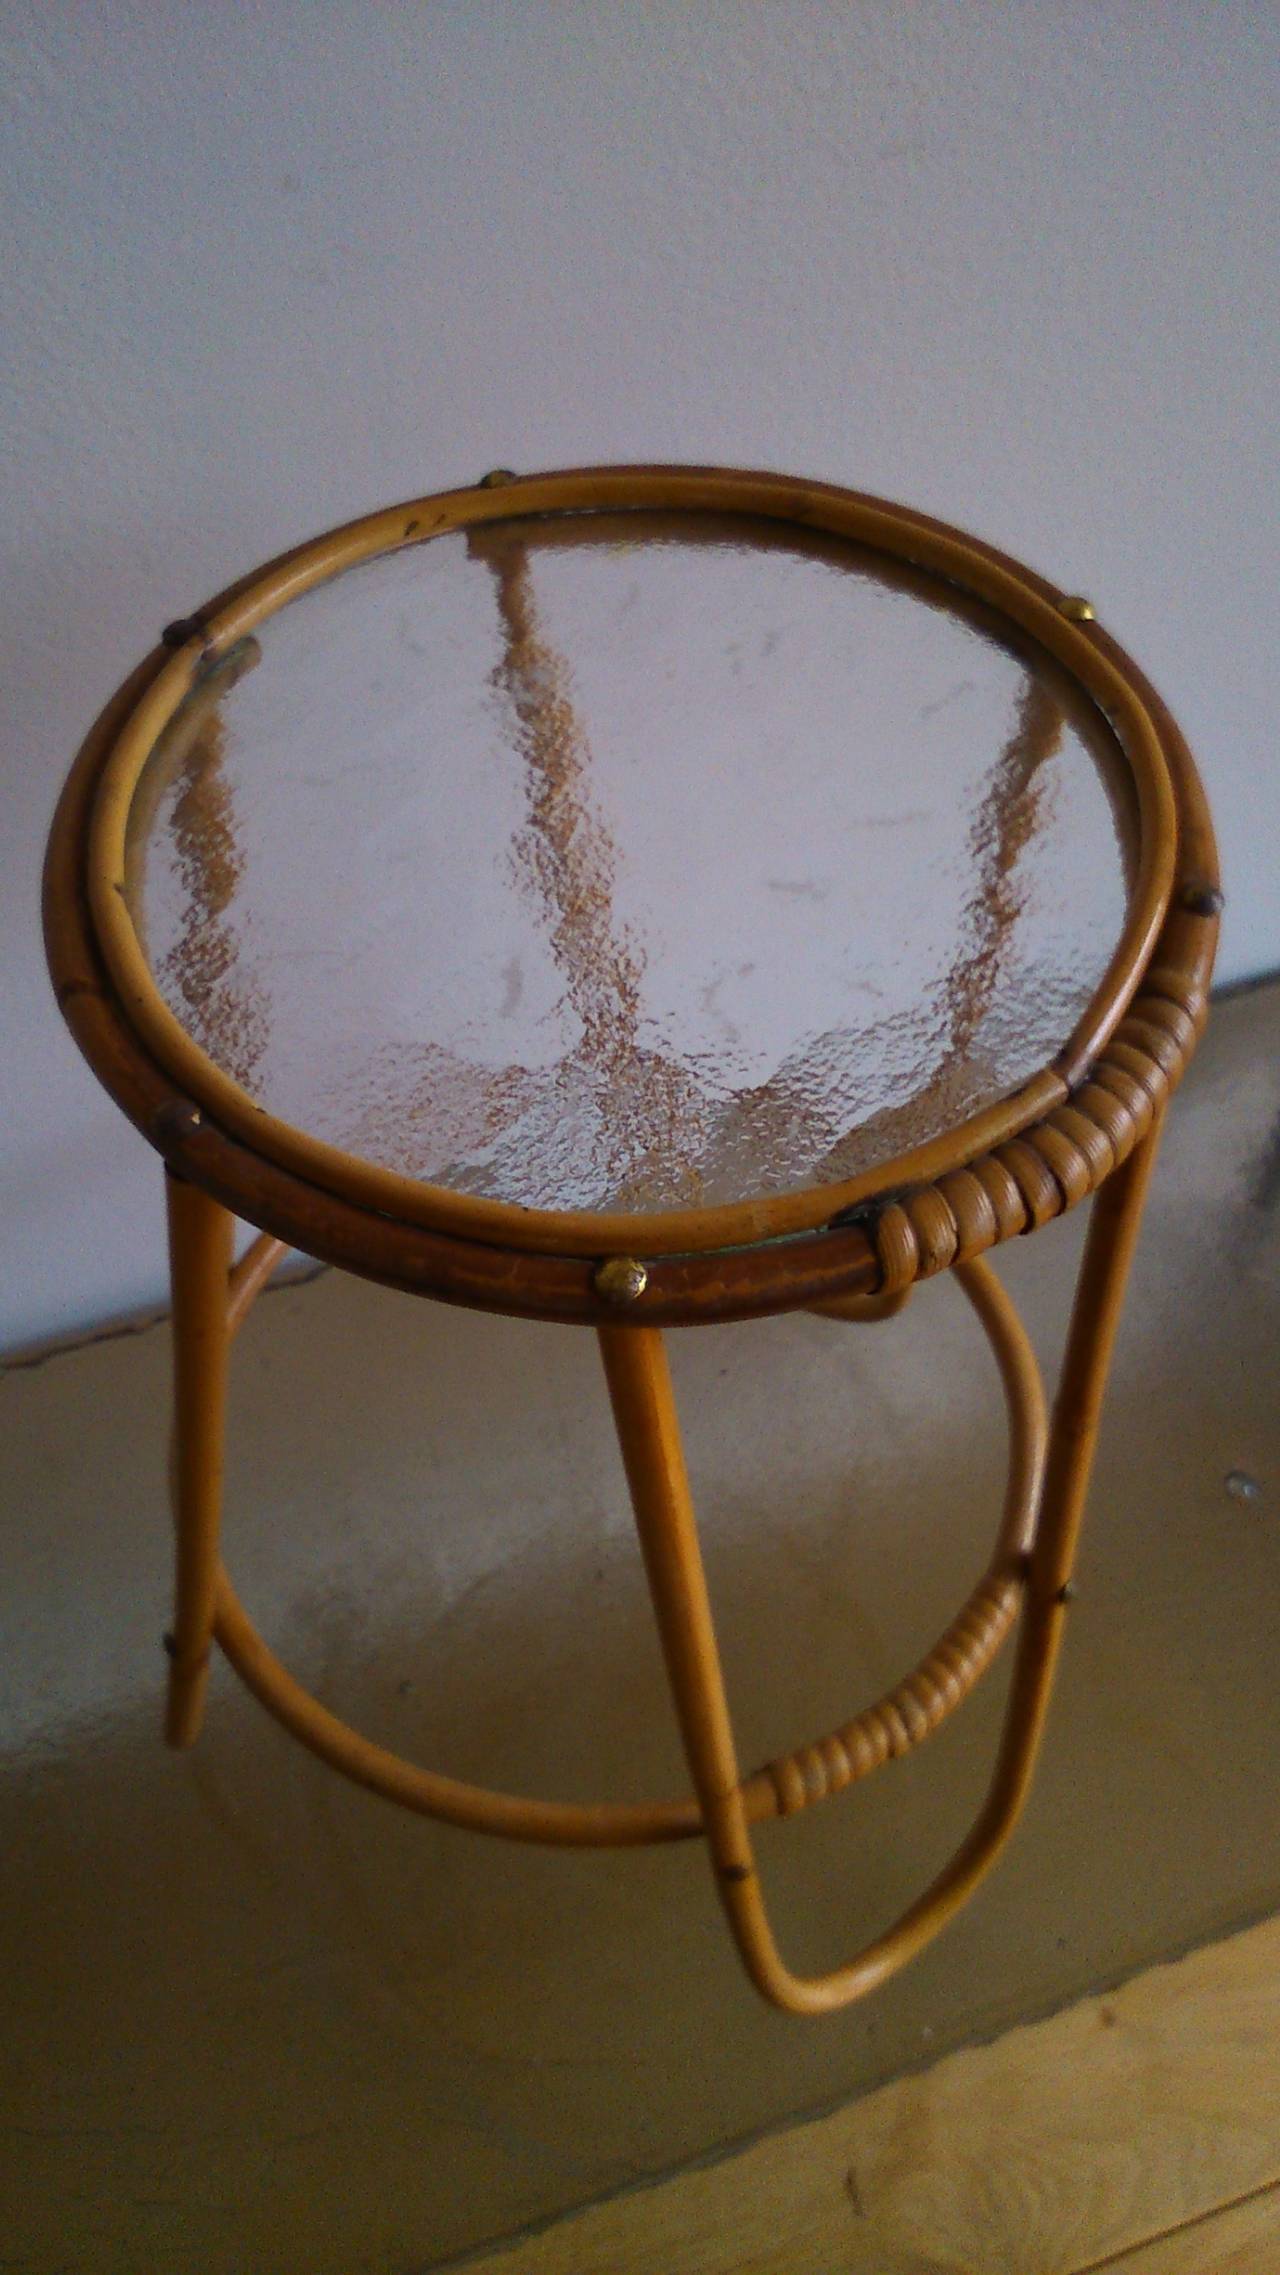 rattan and textured glass 
minor surface wear on the glass part